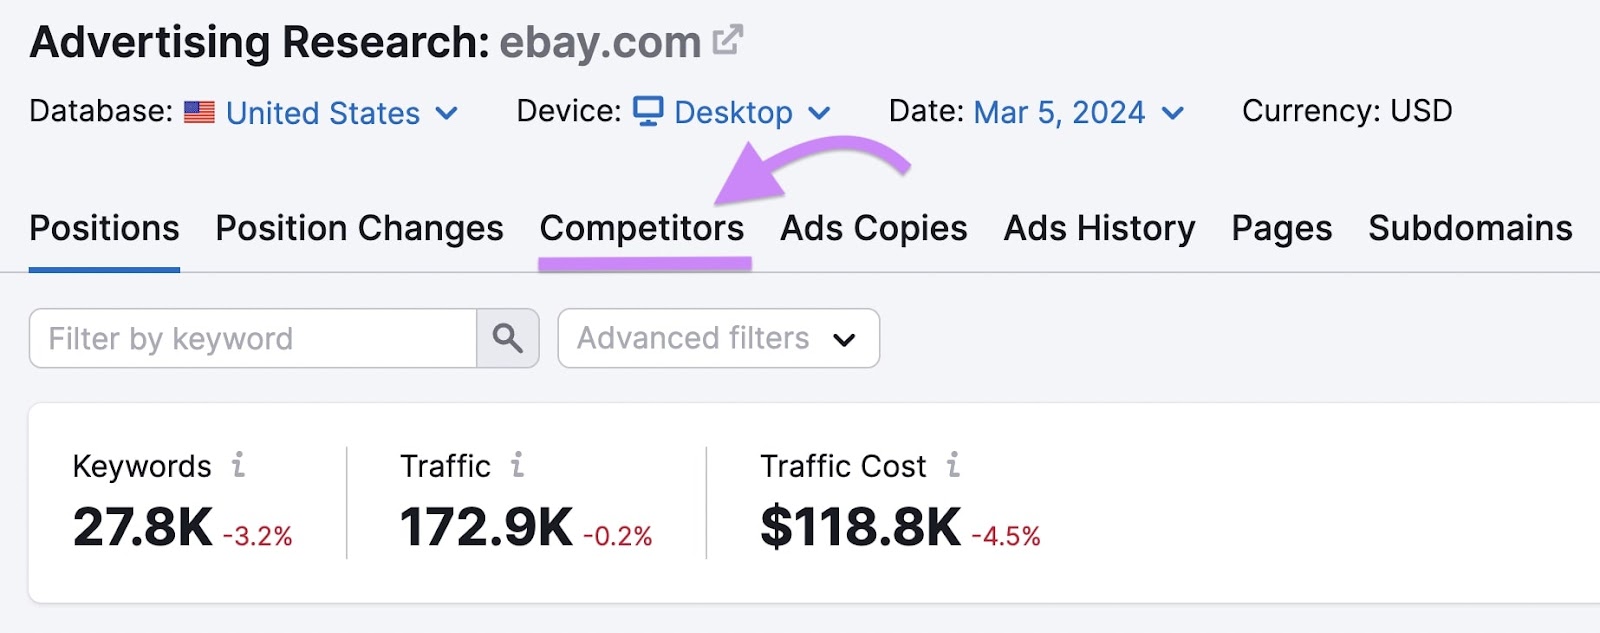 "Competitors" tab highlighted successful  the Advertising Research tool